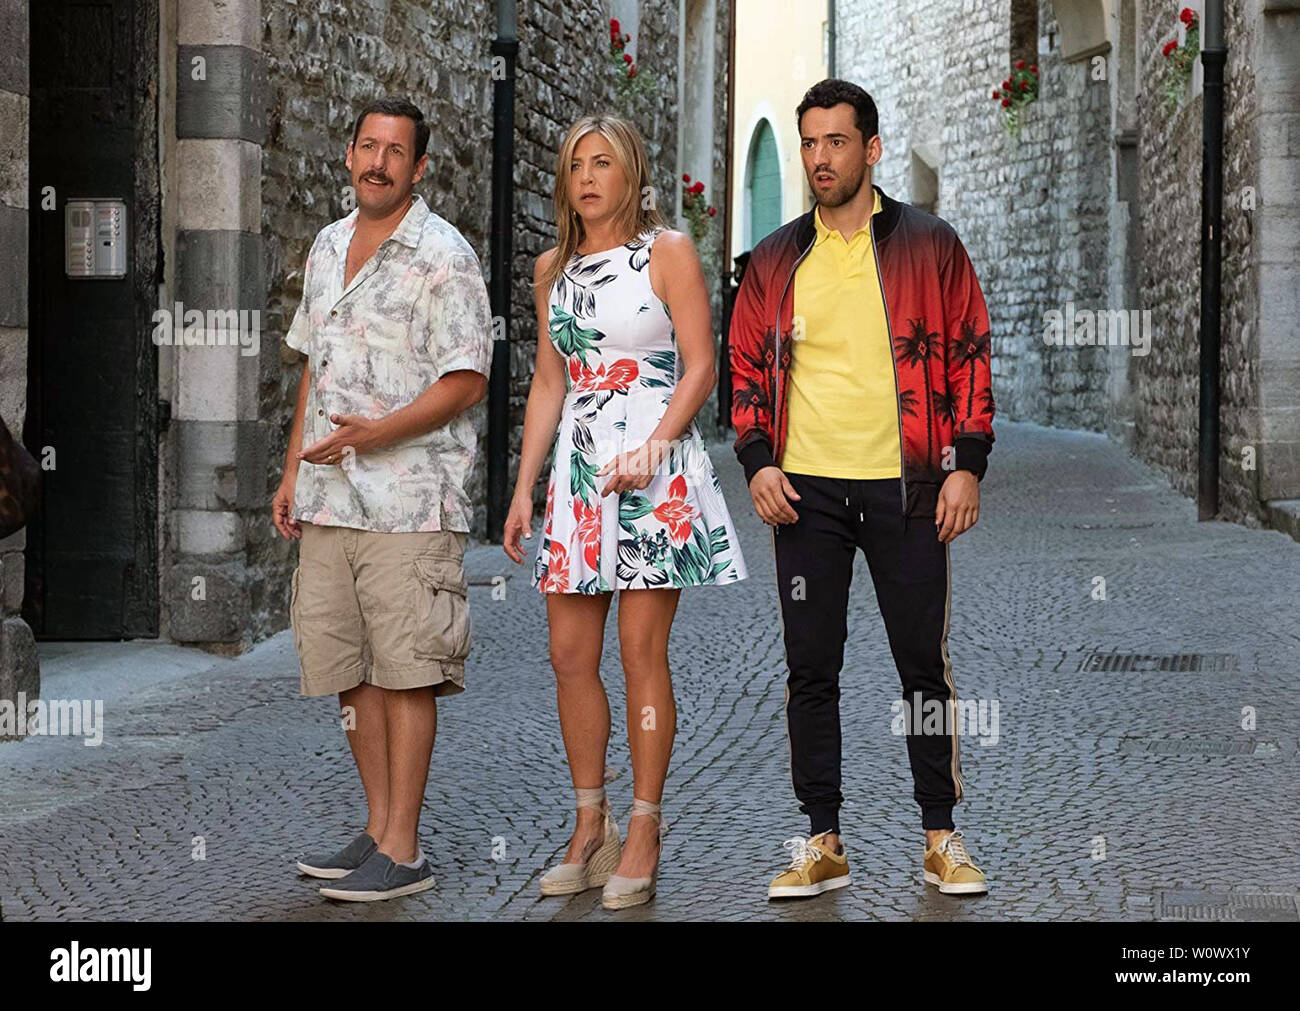 Murder Mystery is a 2019 American comedy mystery film directed by Kyle Newacheck and written by James Vanderbilt. The film stars Adam Sandler, Jennifer Aniston, and Luke Evans,   This photograph is supplied for editorial use only and is the copyright of the film company and/or the designated photographer assigned by the film or production company. Stock Photo